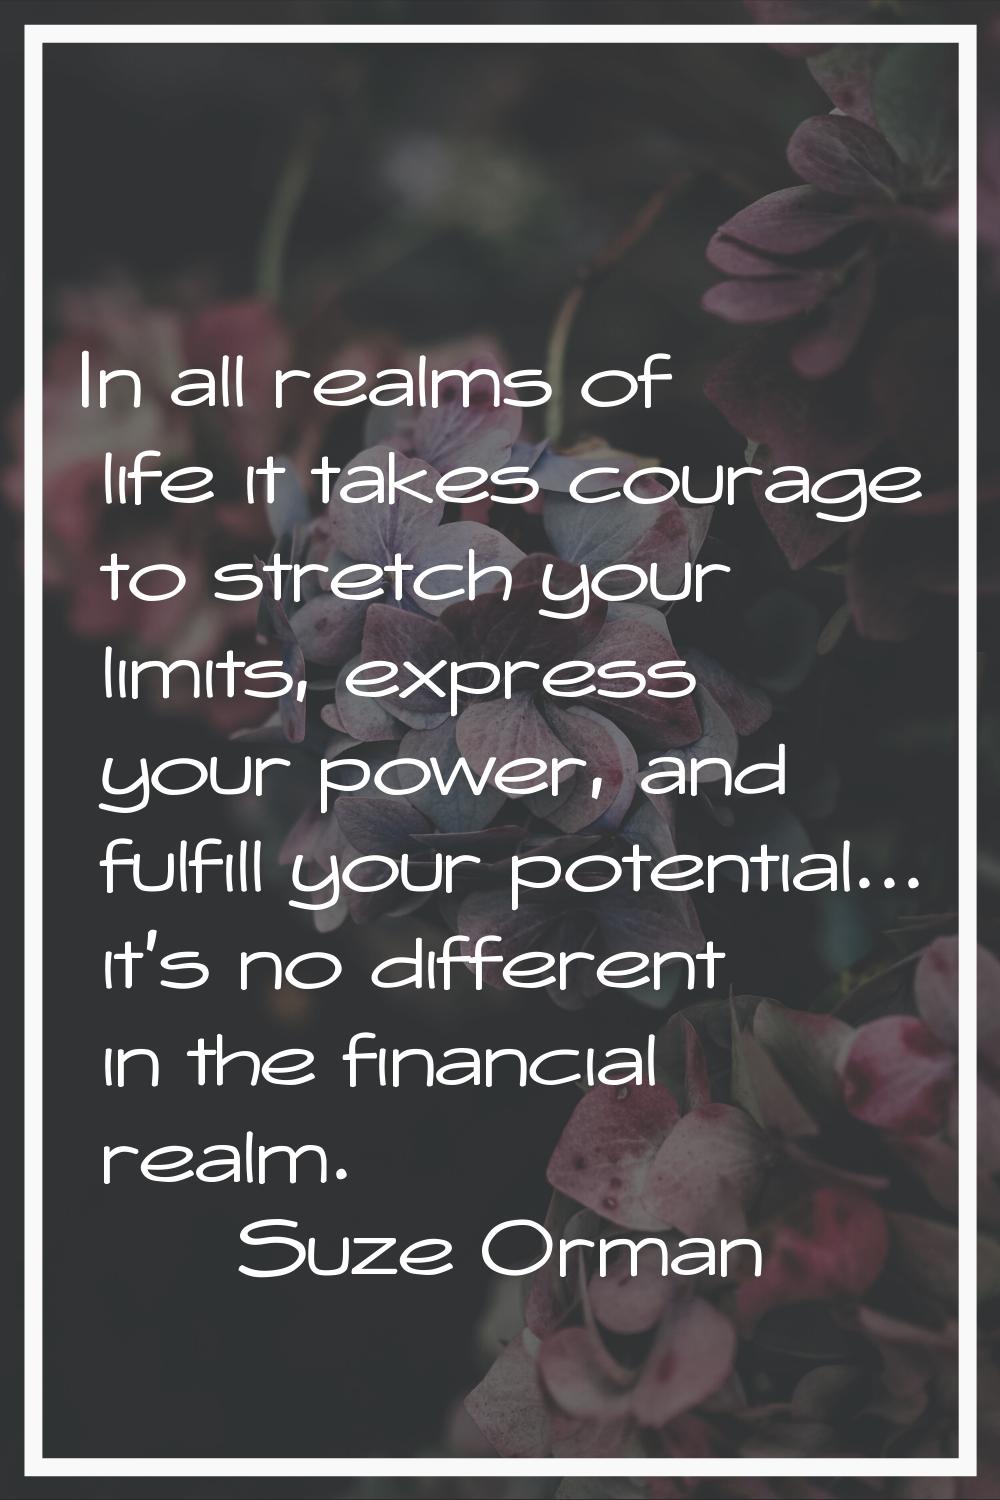 In all realms of life it takes courage to stretch your limits, express your power, and fulfill your